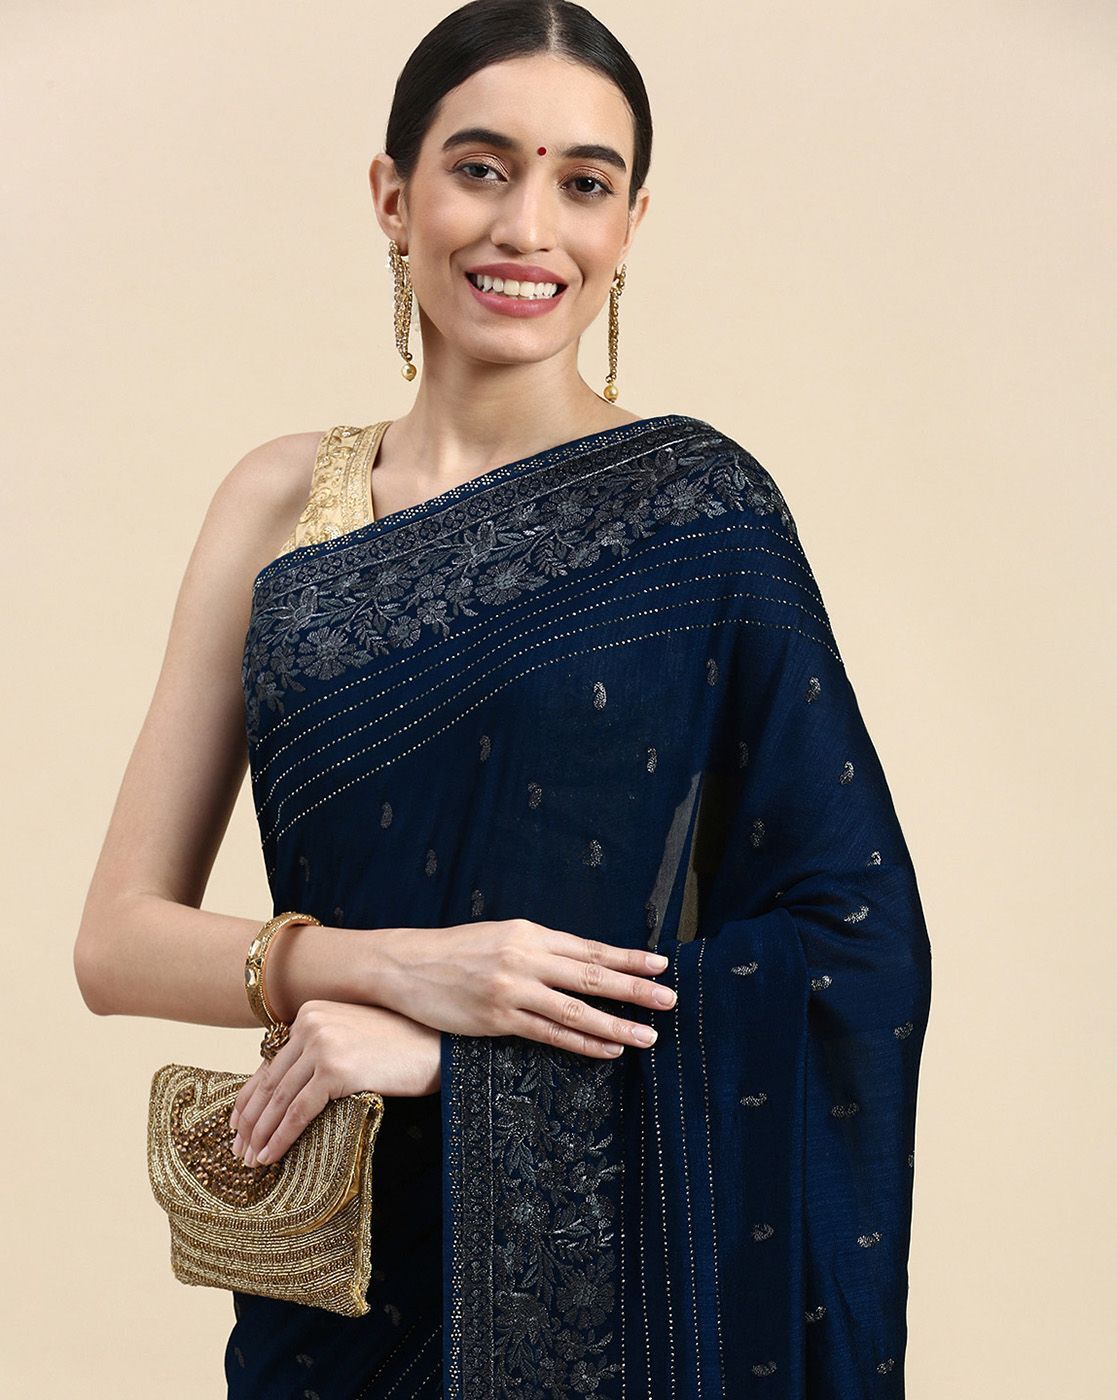 Buy Teal Blue Patterned Saree Online in India @Mohey - Saree for Women